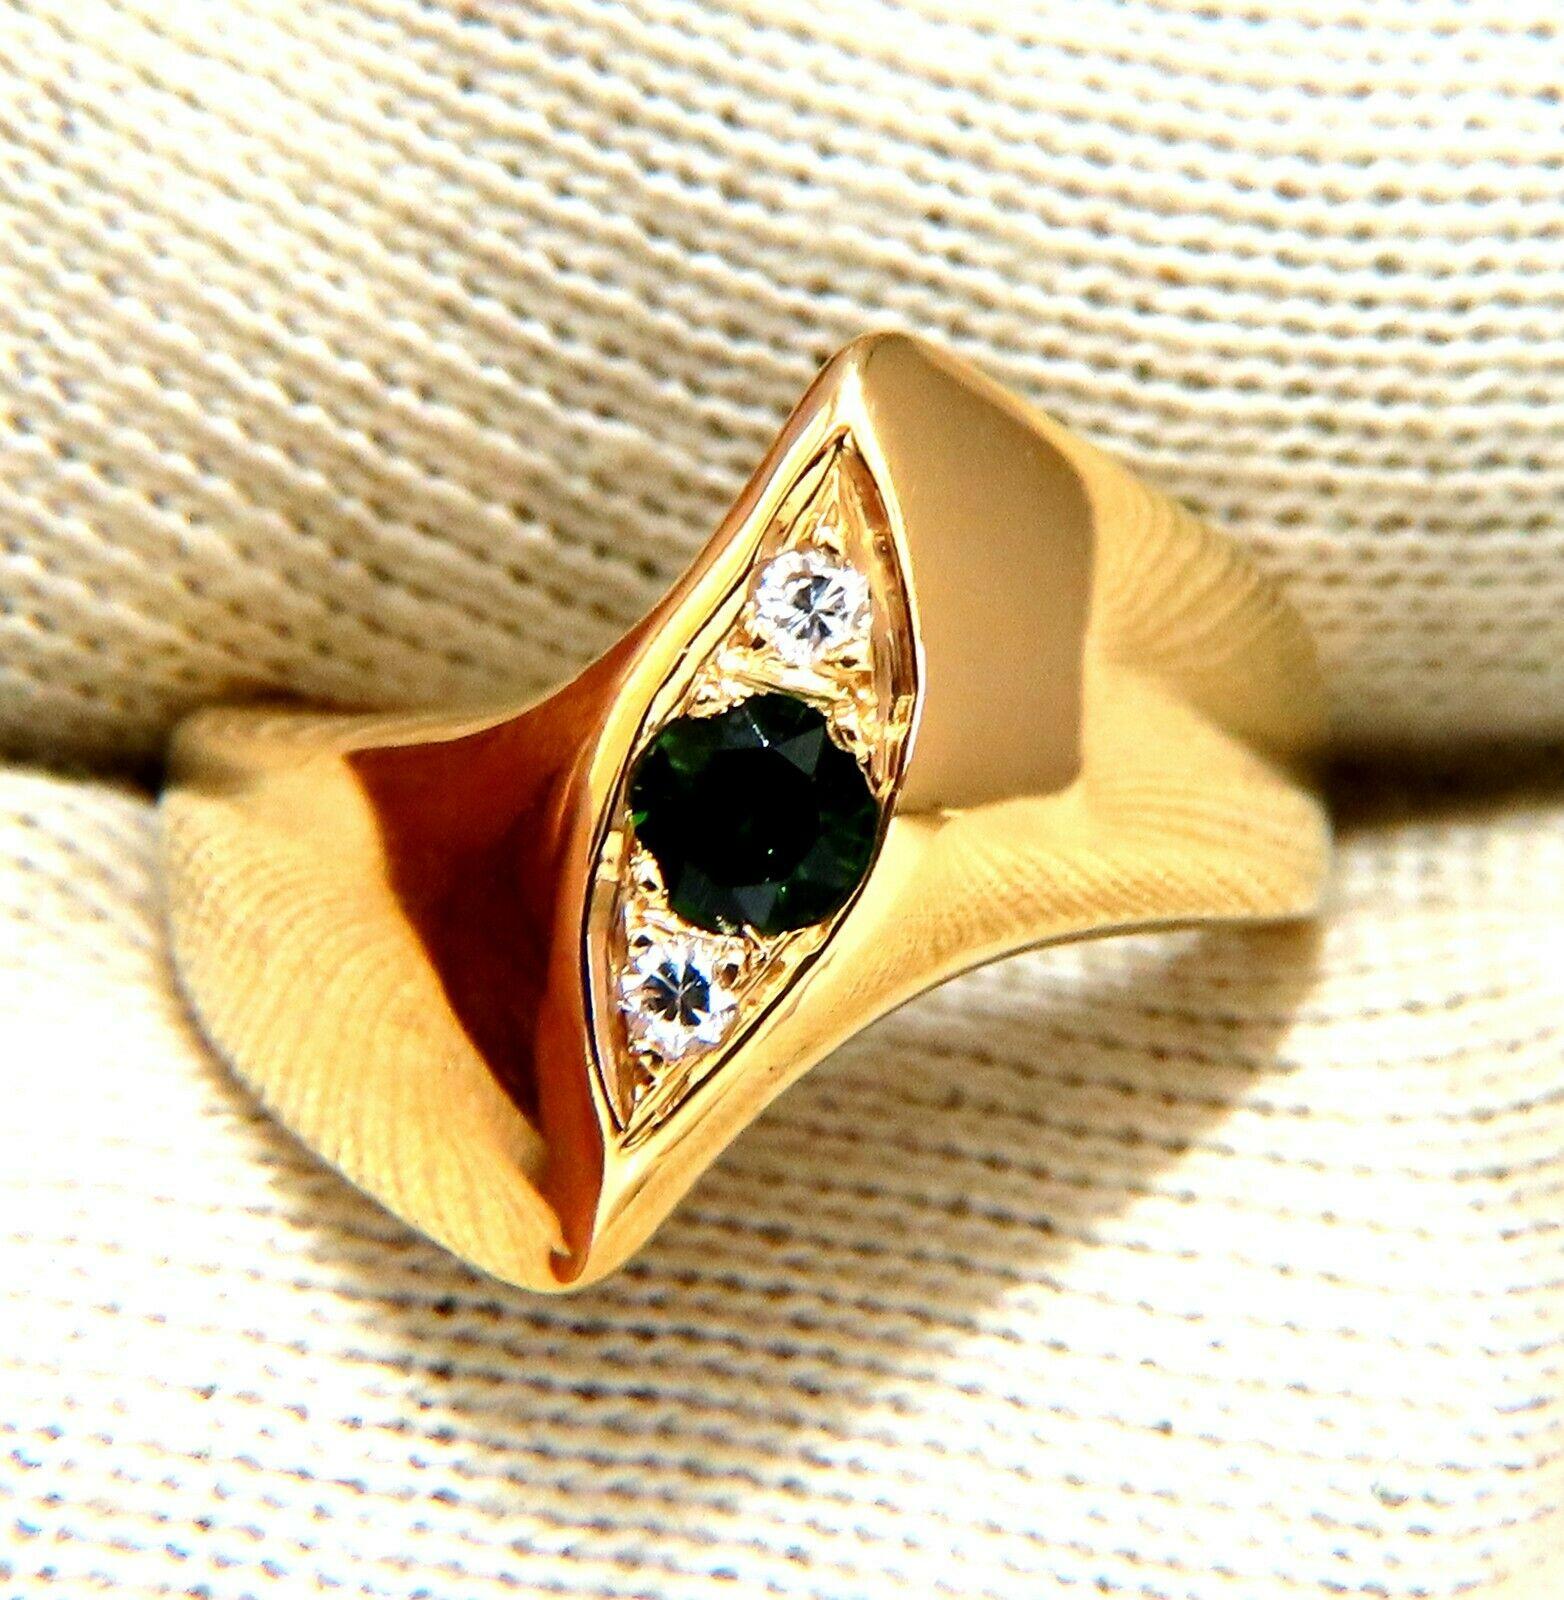 .20 carat natural Green Garnet tsavorite ring.

Mint green, clean clarity and transparent.

Round full cut brilliant.

.10 carat natural round diamonds H color vs2 clarity.

14 karat yellow gold.

Total weight 6.7 g

Ring is 15.8 MM wide

Depth of